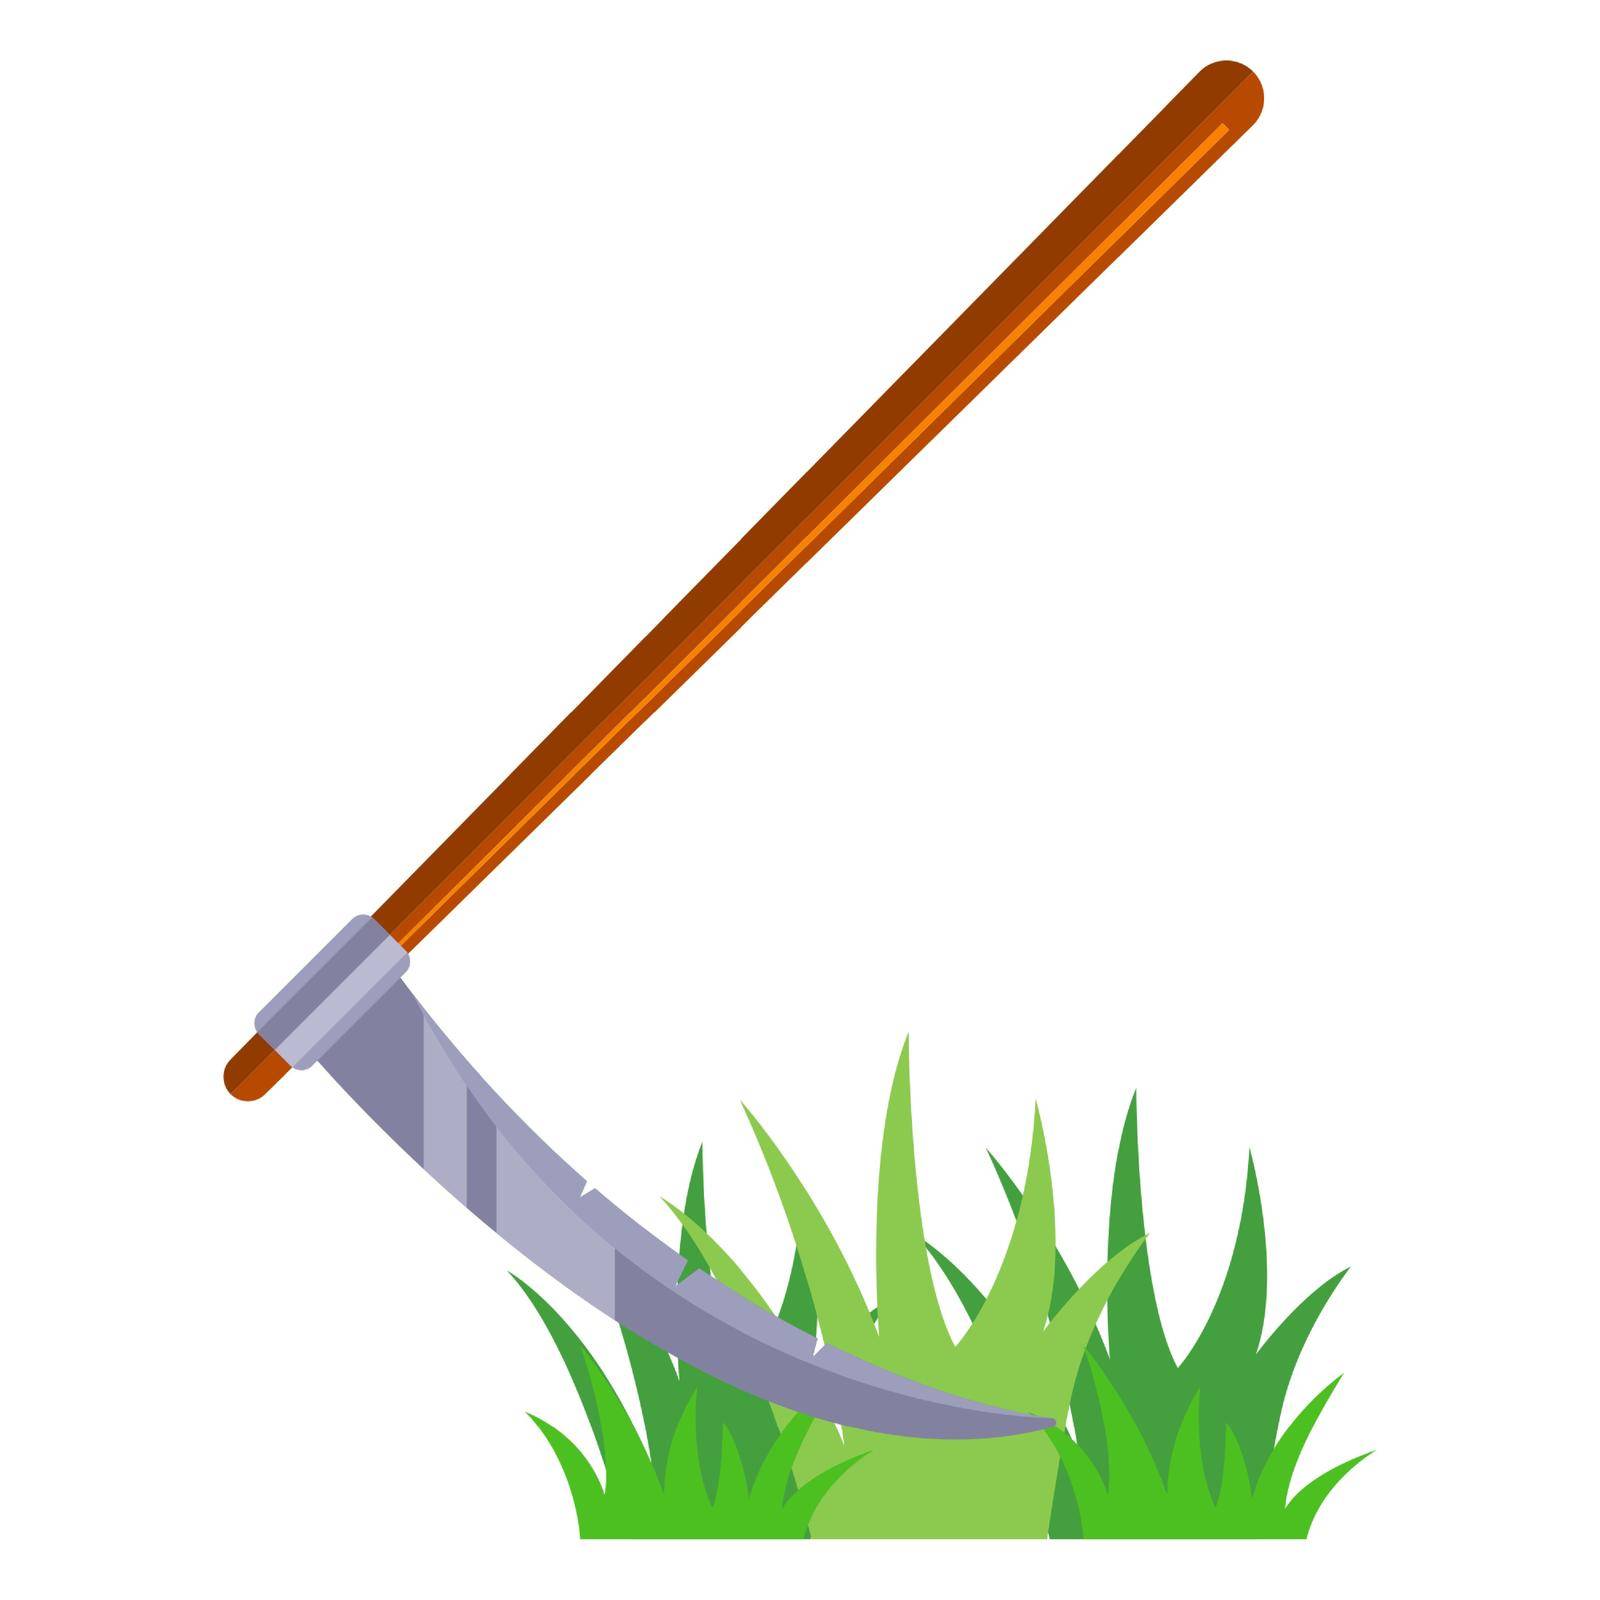 the scythe mows the grass. agricultural equipment for cleaning the territory. flat vector illustration.